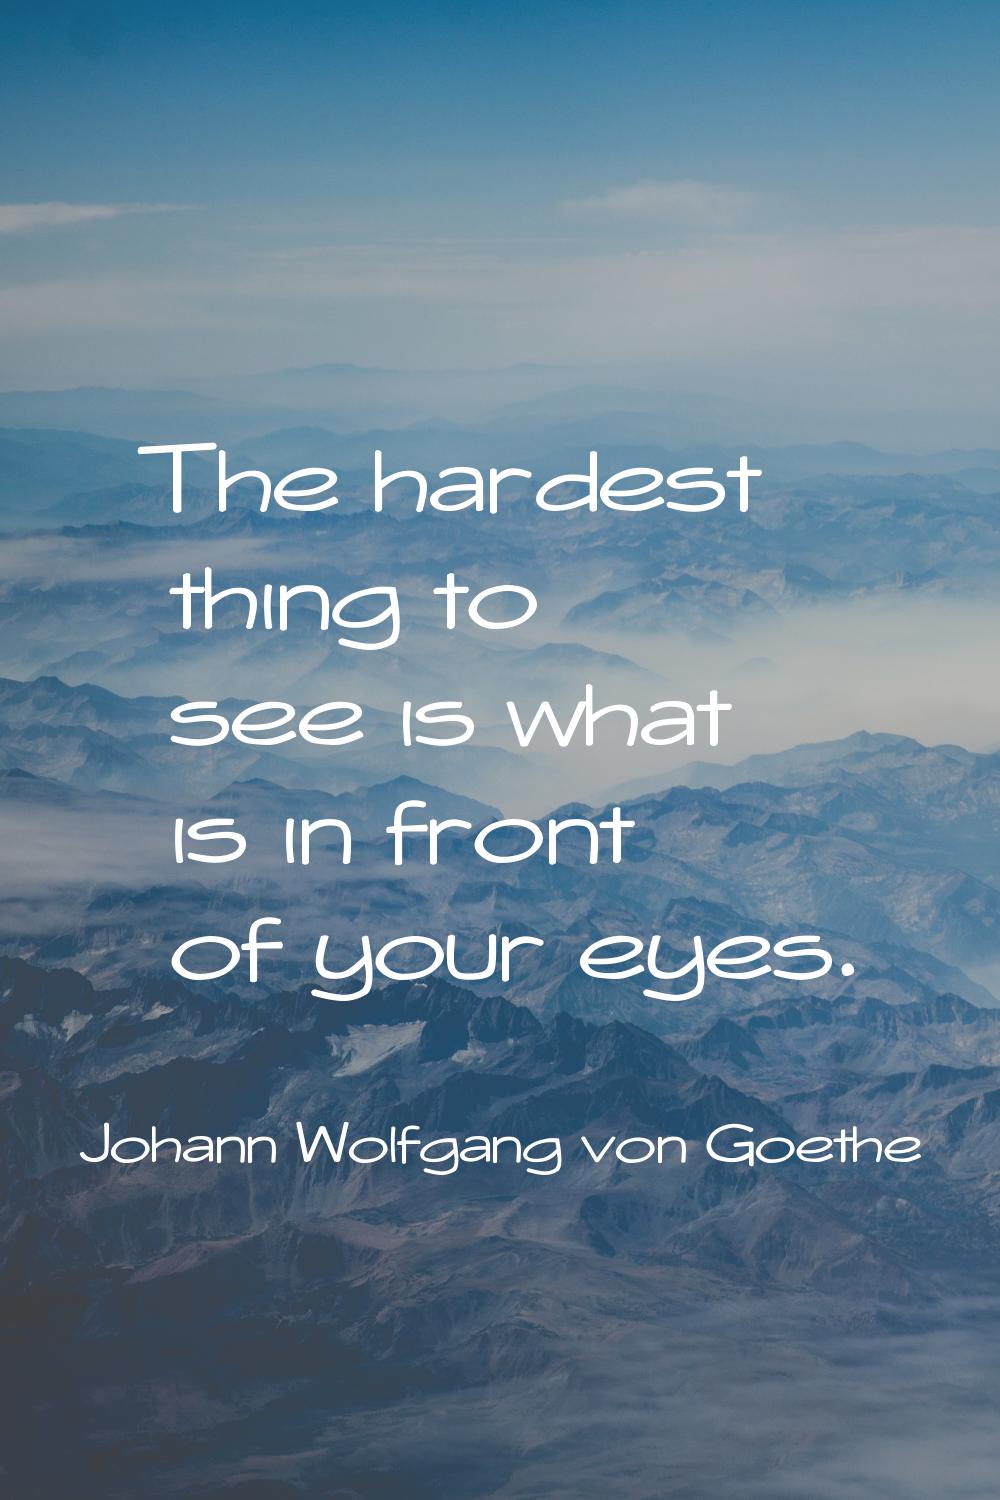 The hardest thing to see is what is in front of your eyes.